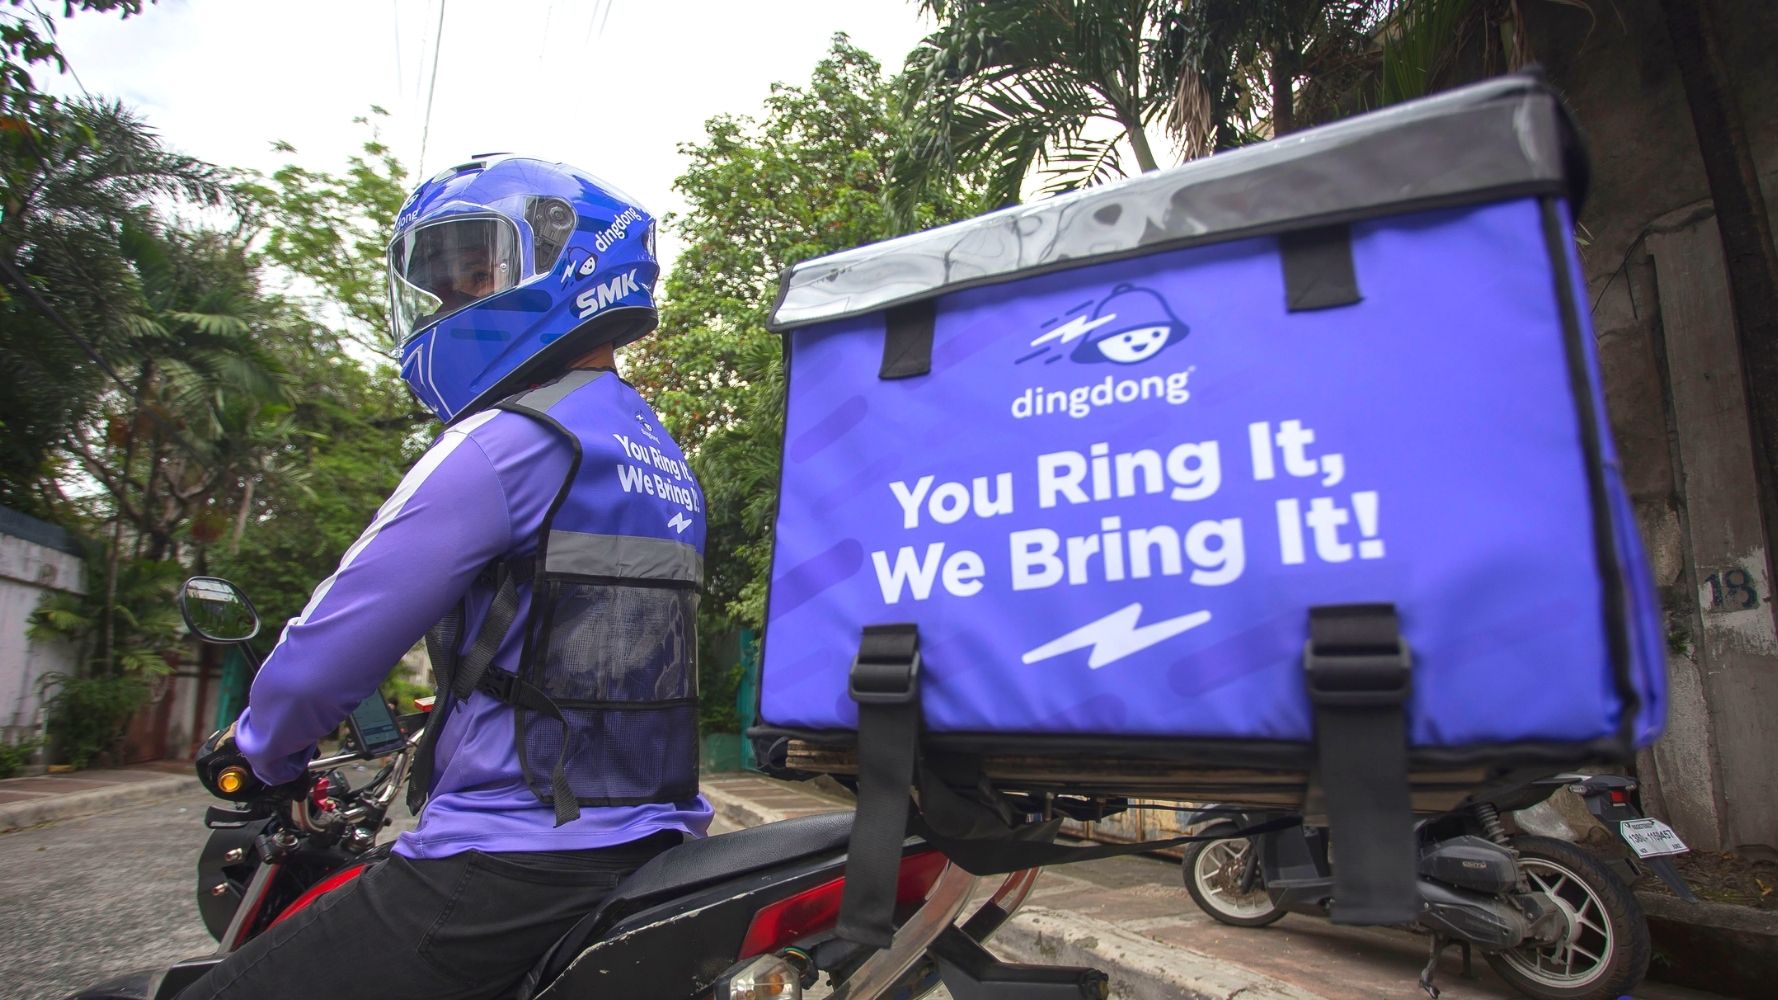 Dingdong Delivery and Marketplace app: Sell and Deliver on One Platform